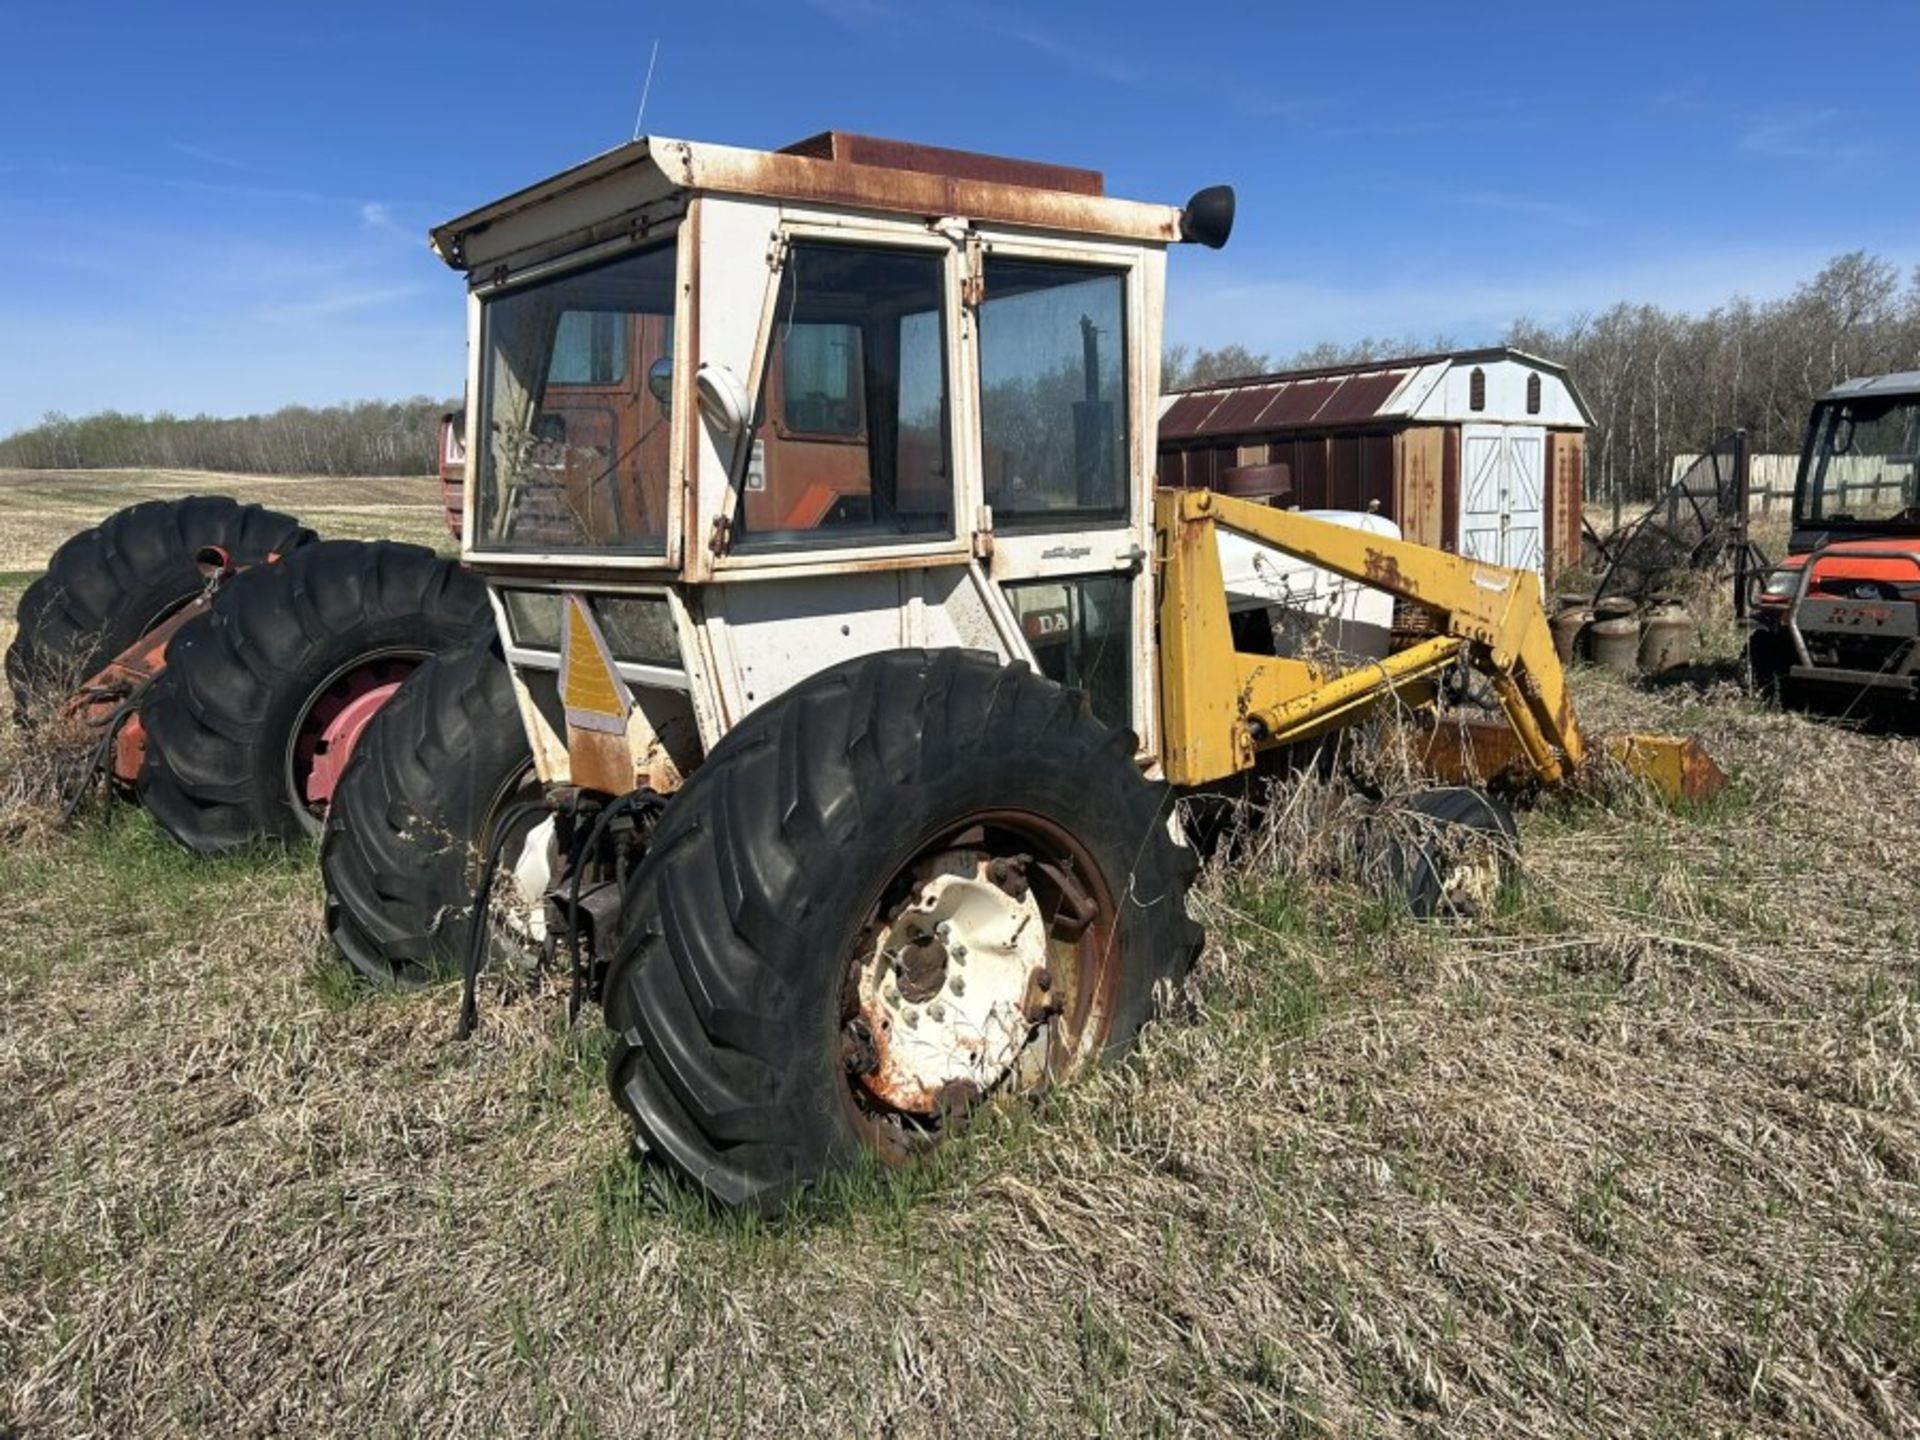 DAVID BROWN 990 DIESEL TRACTOR W/CAB, EZEE ON 80 FEL 1,325 HR SHOWING (HOLE IN ONE PISTON) - Image 3 of 8